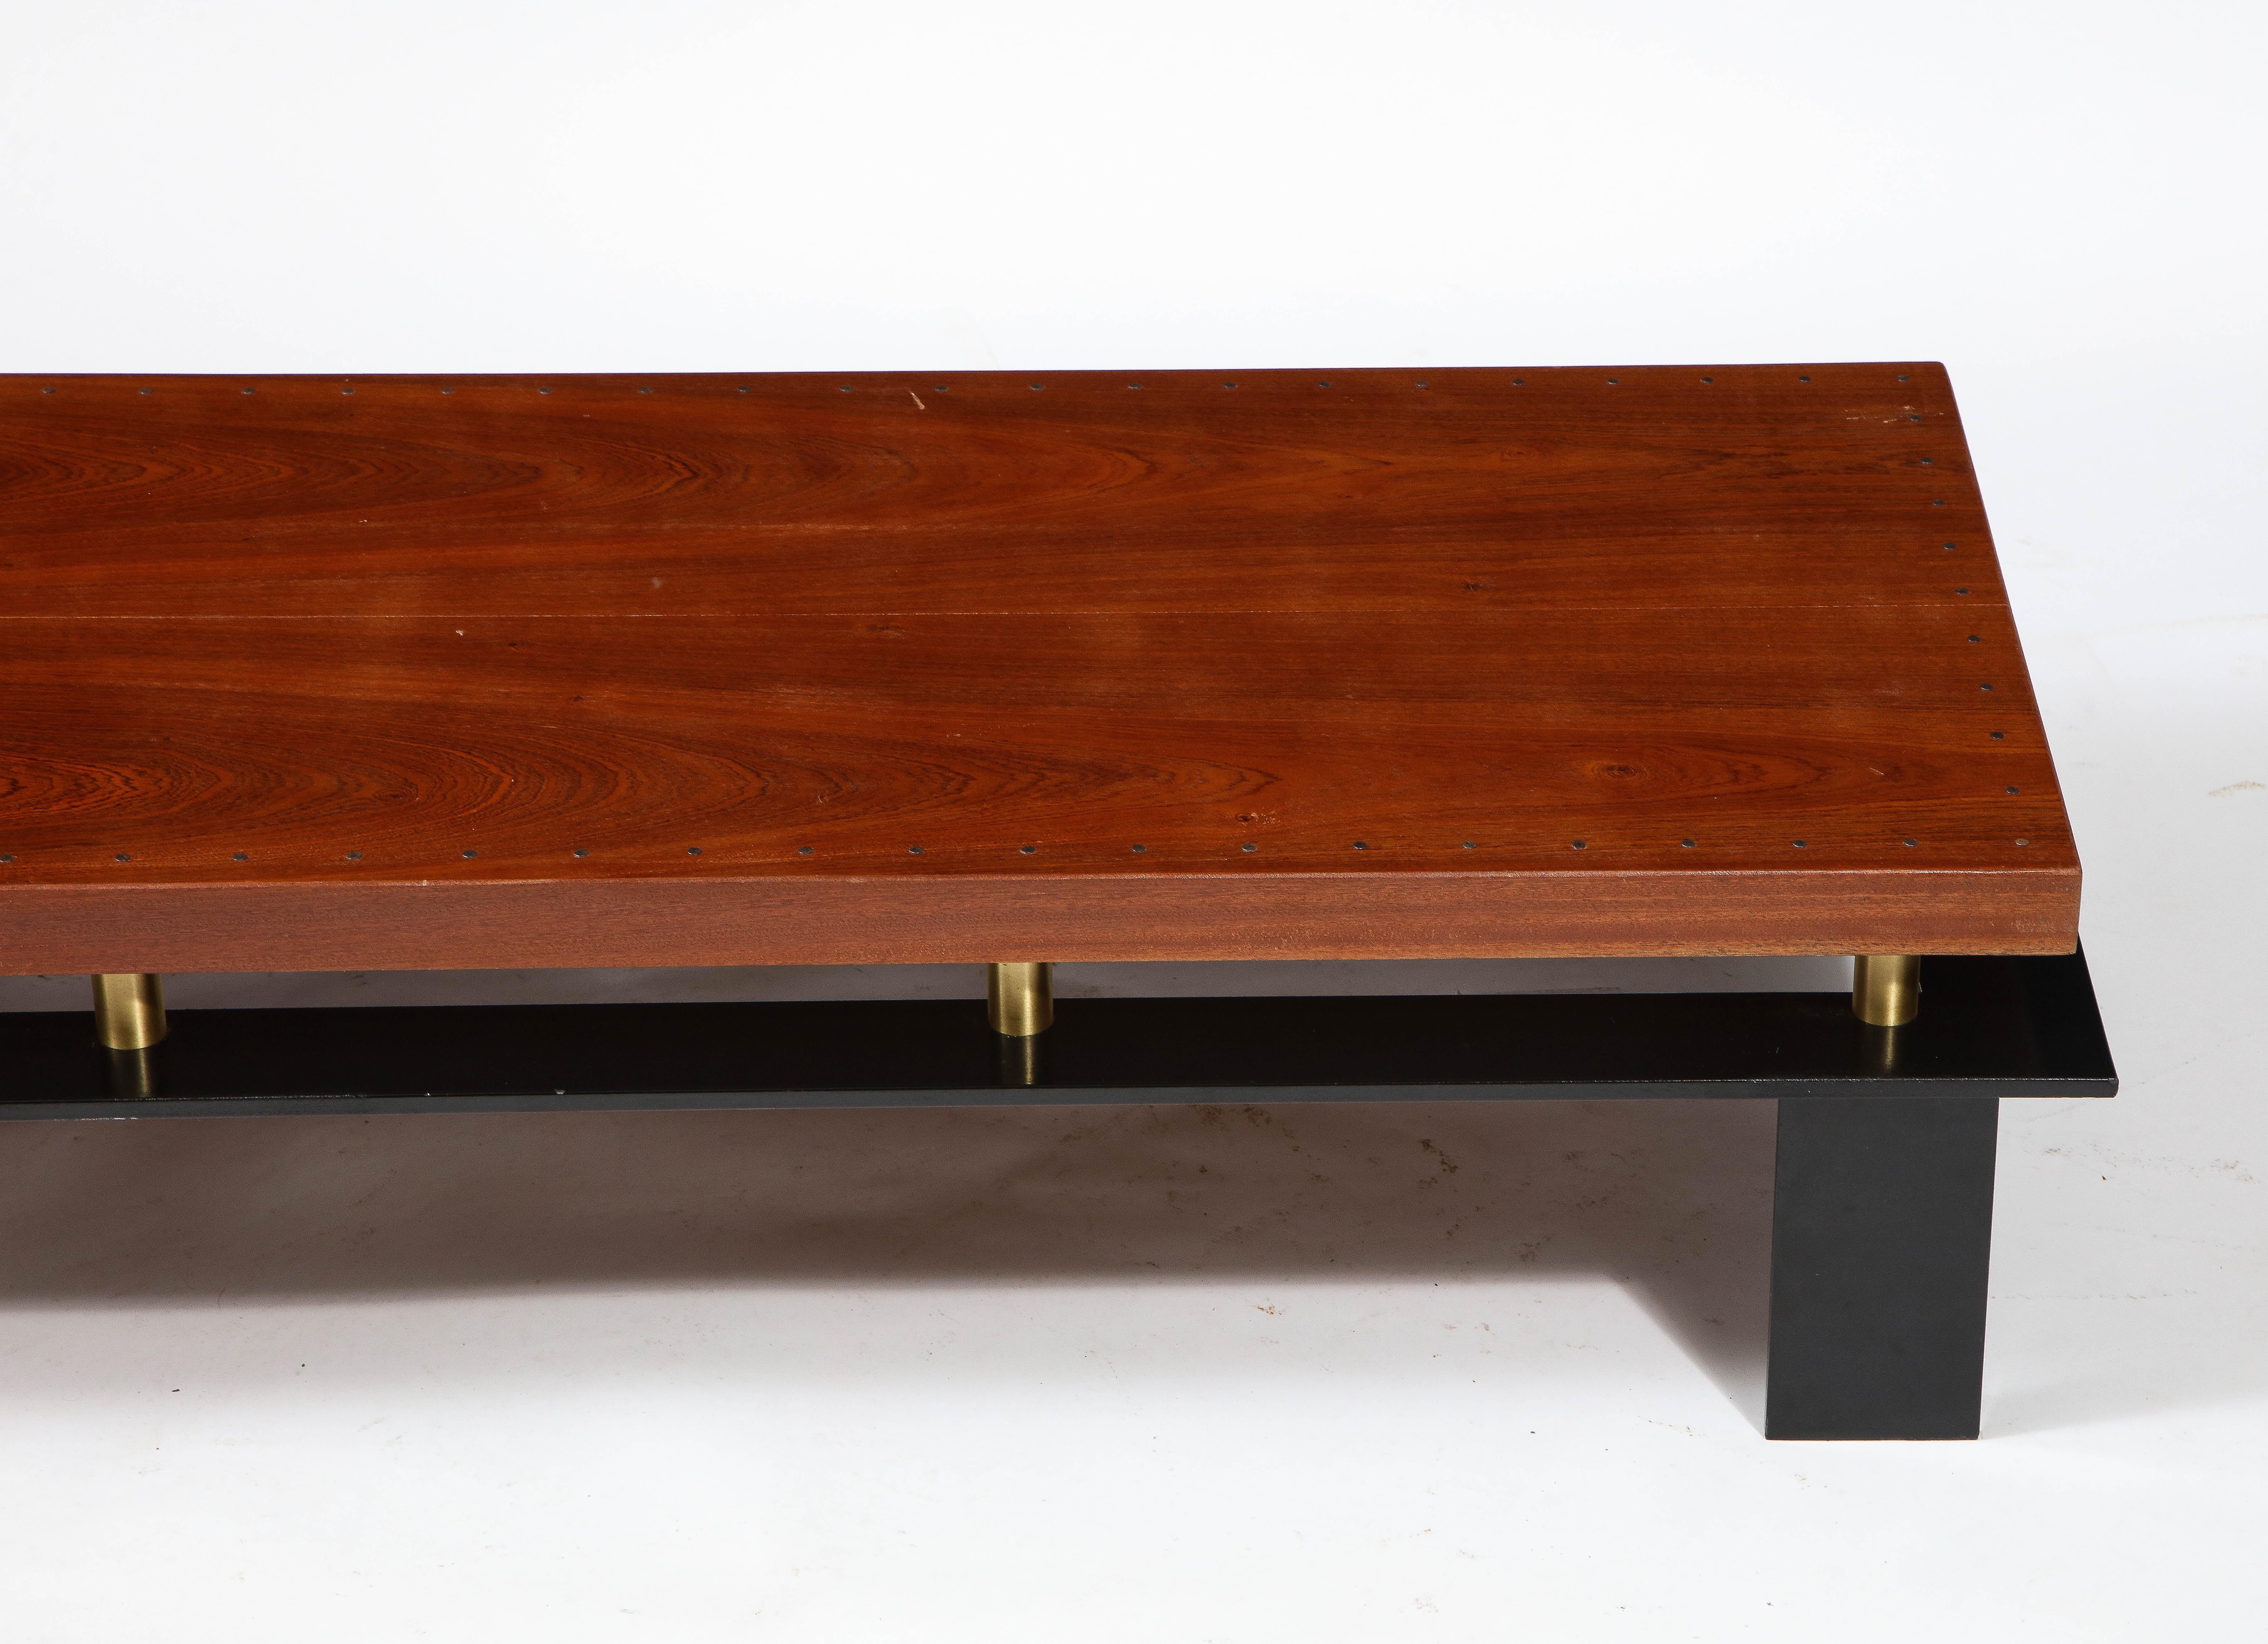 Large coffee table with solid walnut top with nailhead details on a solid black enameled steel base with brass stands.